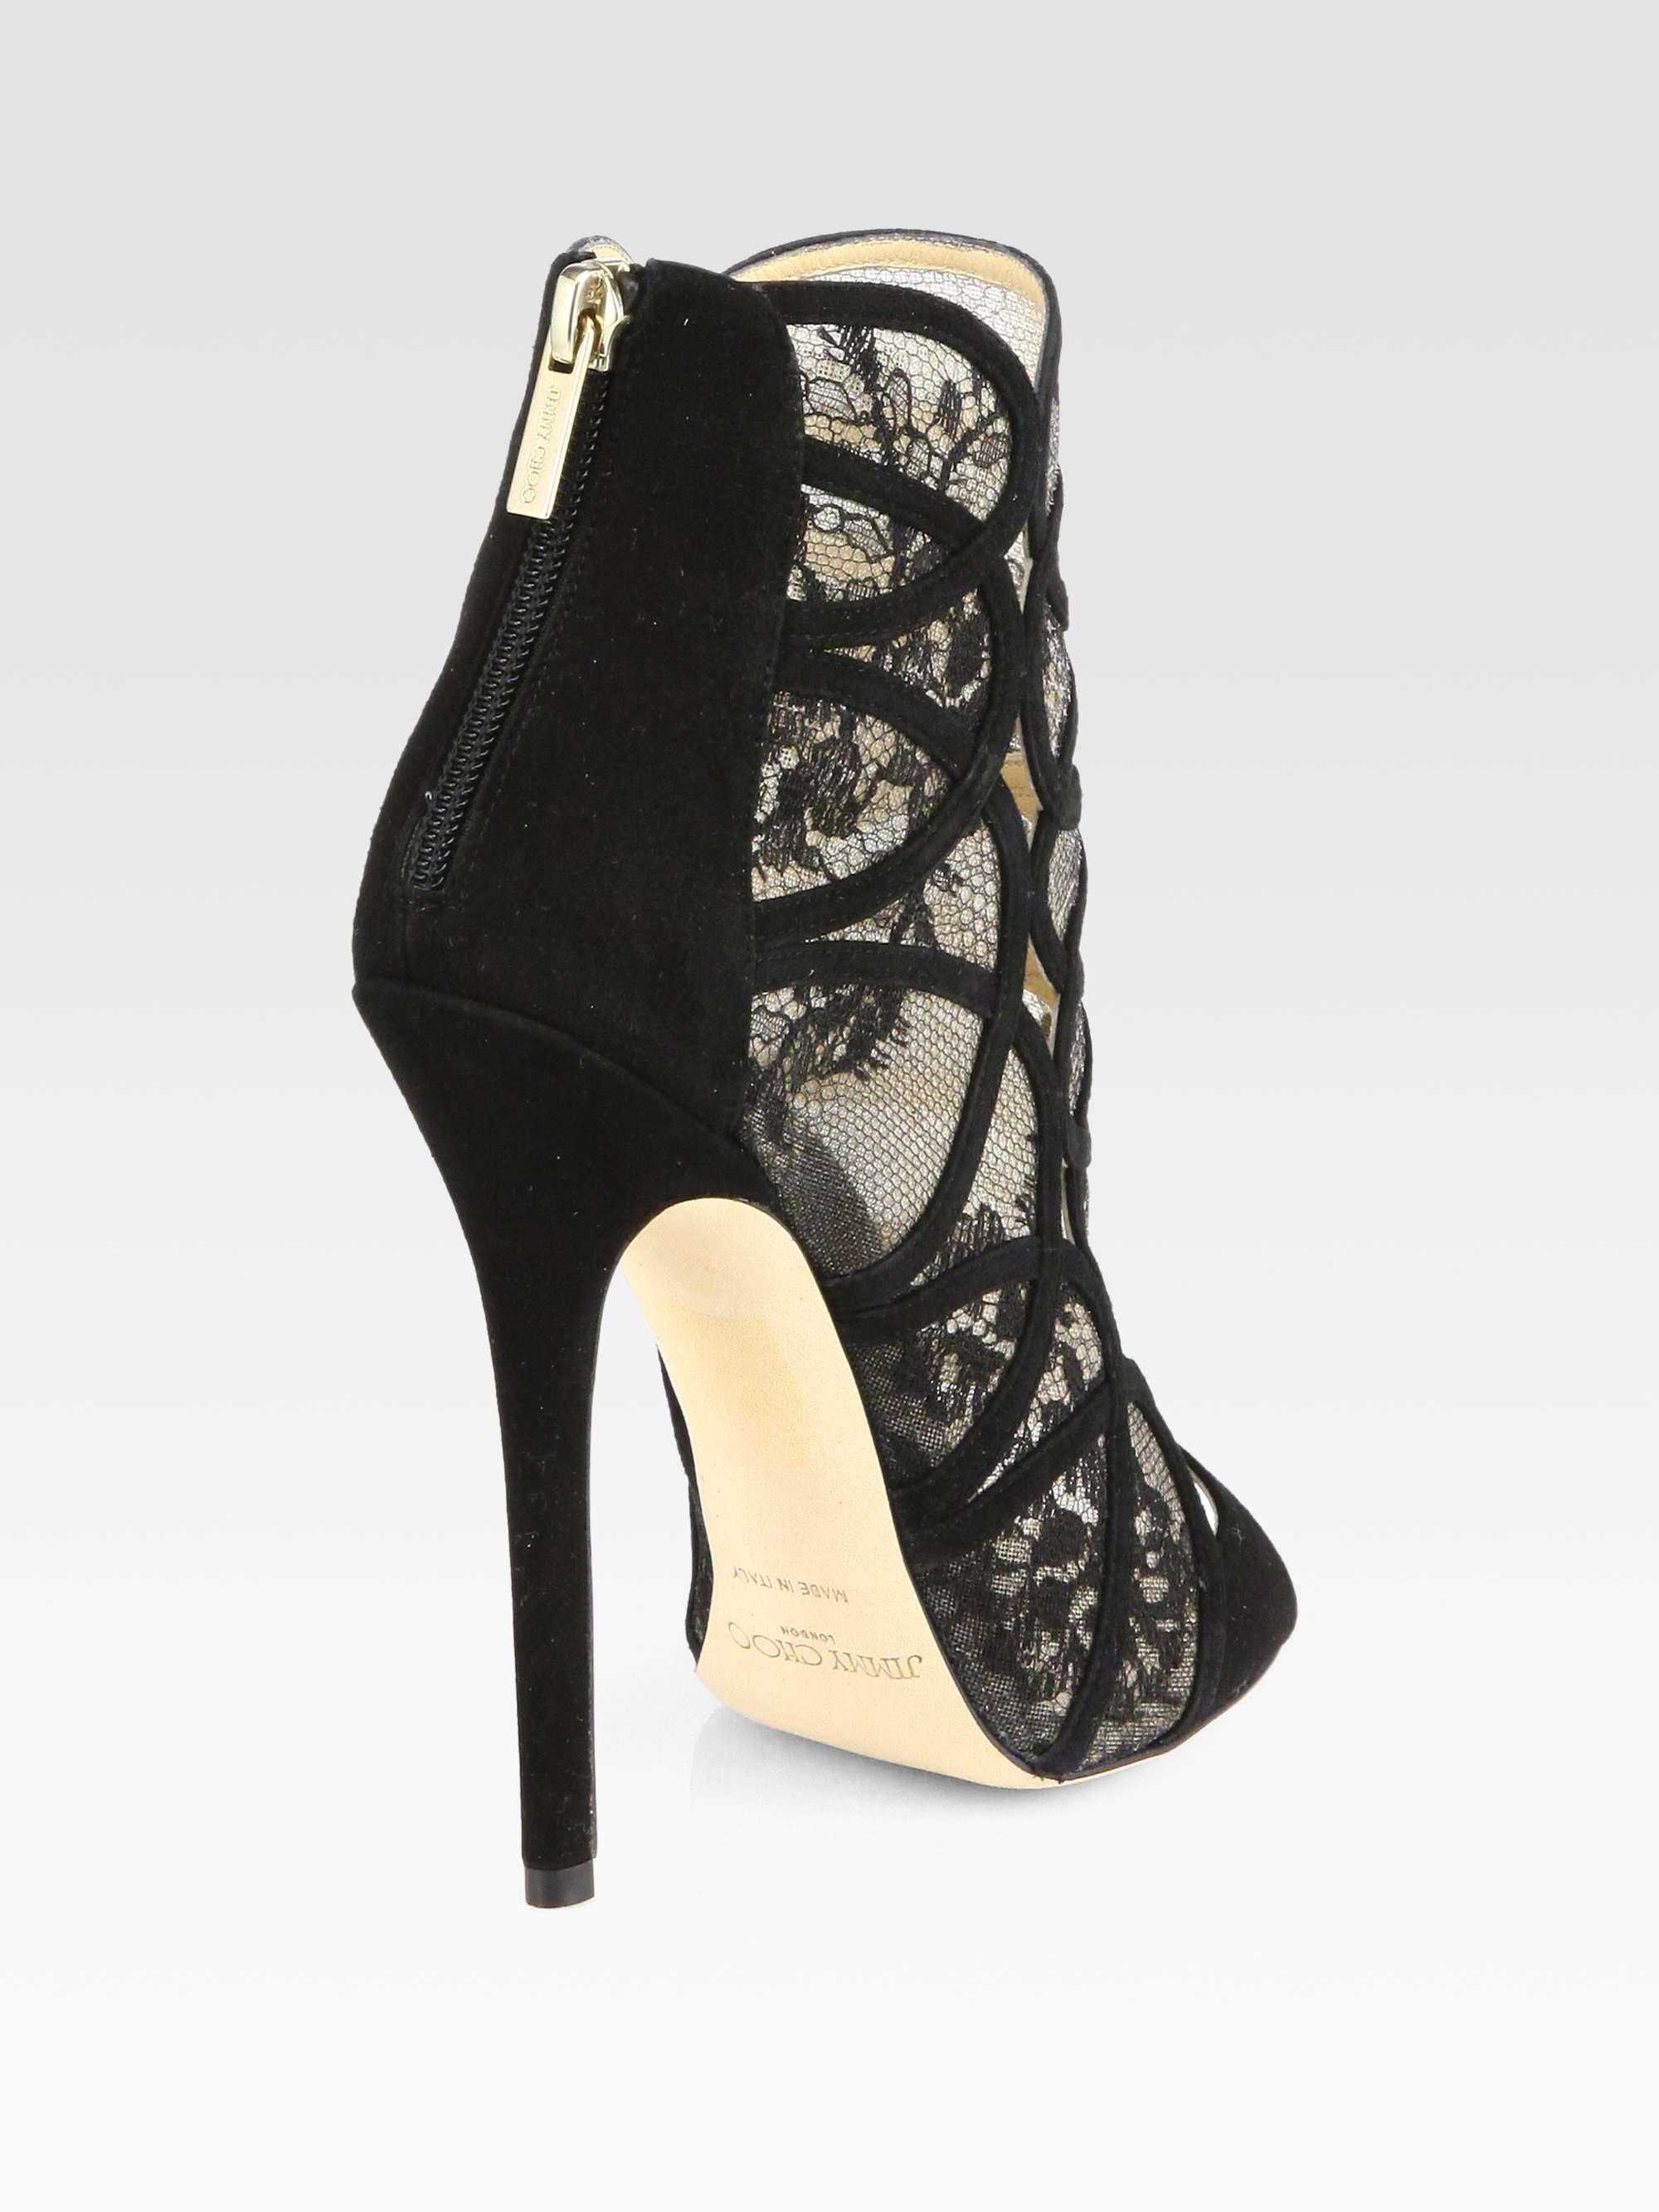 Lyst - Jimmy Choo Flaunt Lace Suede Ankle Boots in Black